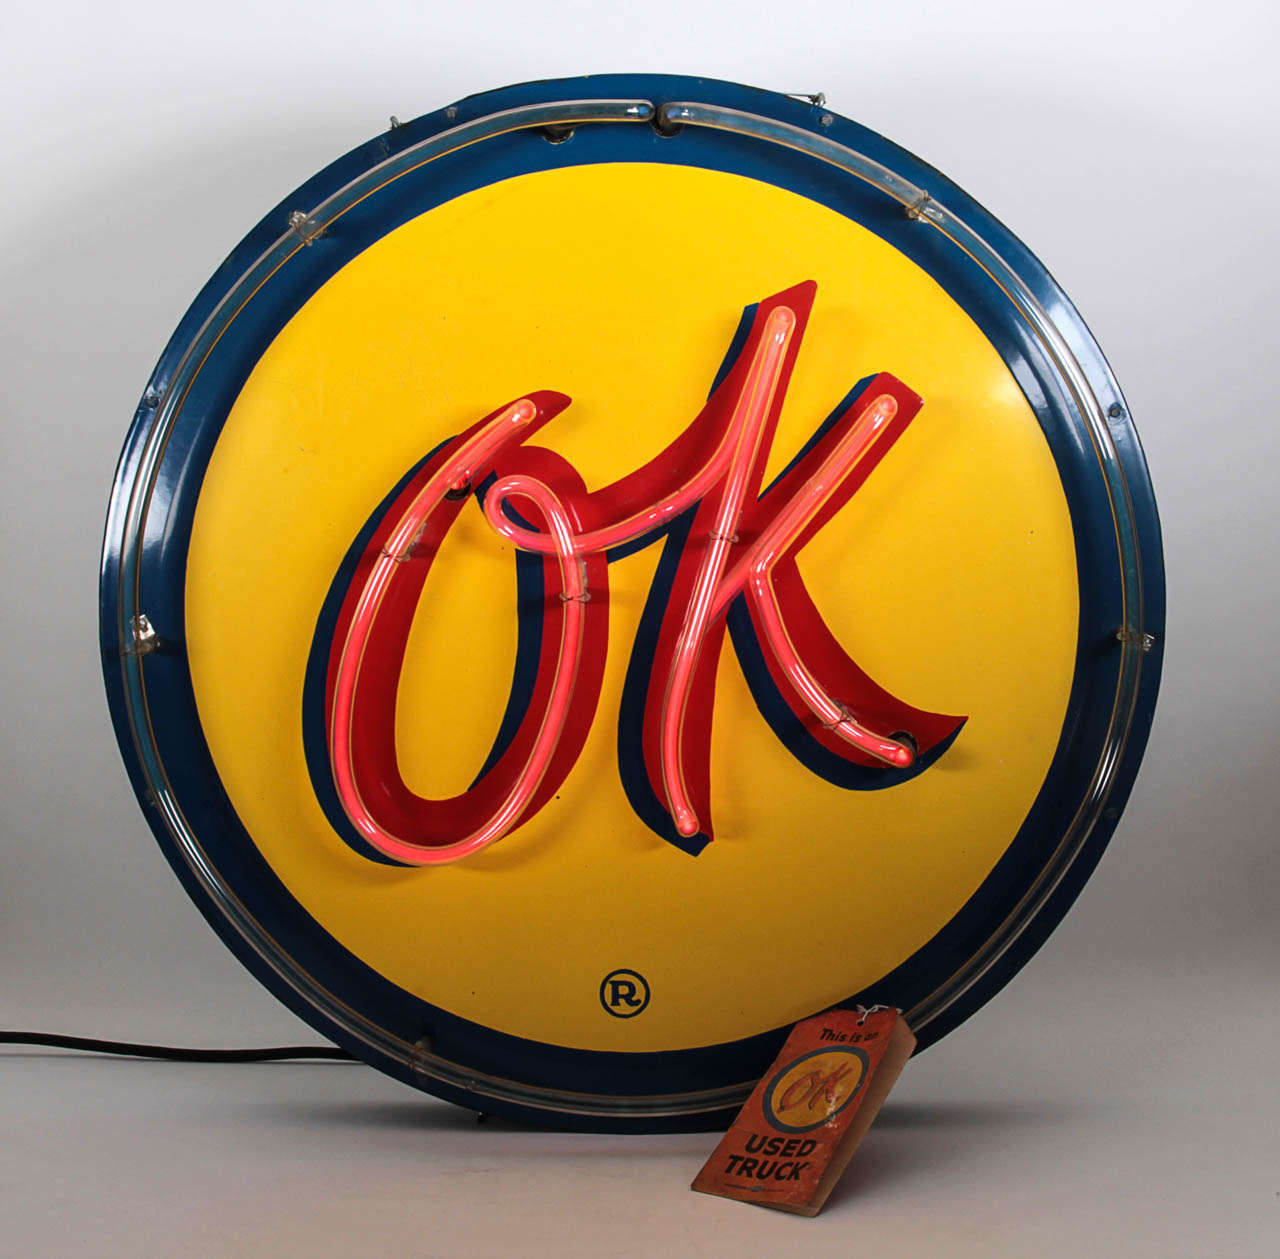 AMERICAN NEON DESIGN

OK Chevrolet Used Truck Sign  c.1940’s

Blue, yellow and red baked enamel on metal with an orange neon tube spelling out “OK” encircled with a round blue neon border, original paper tag. 

Marks: Registration Mark (in the